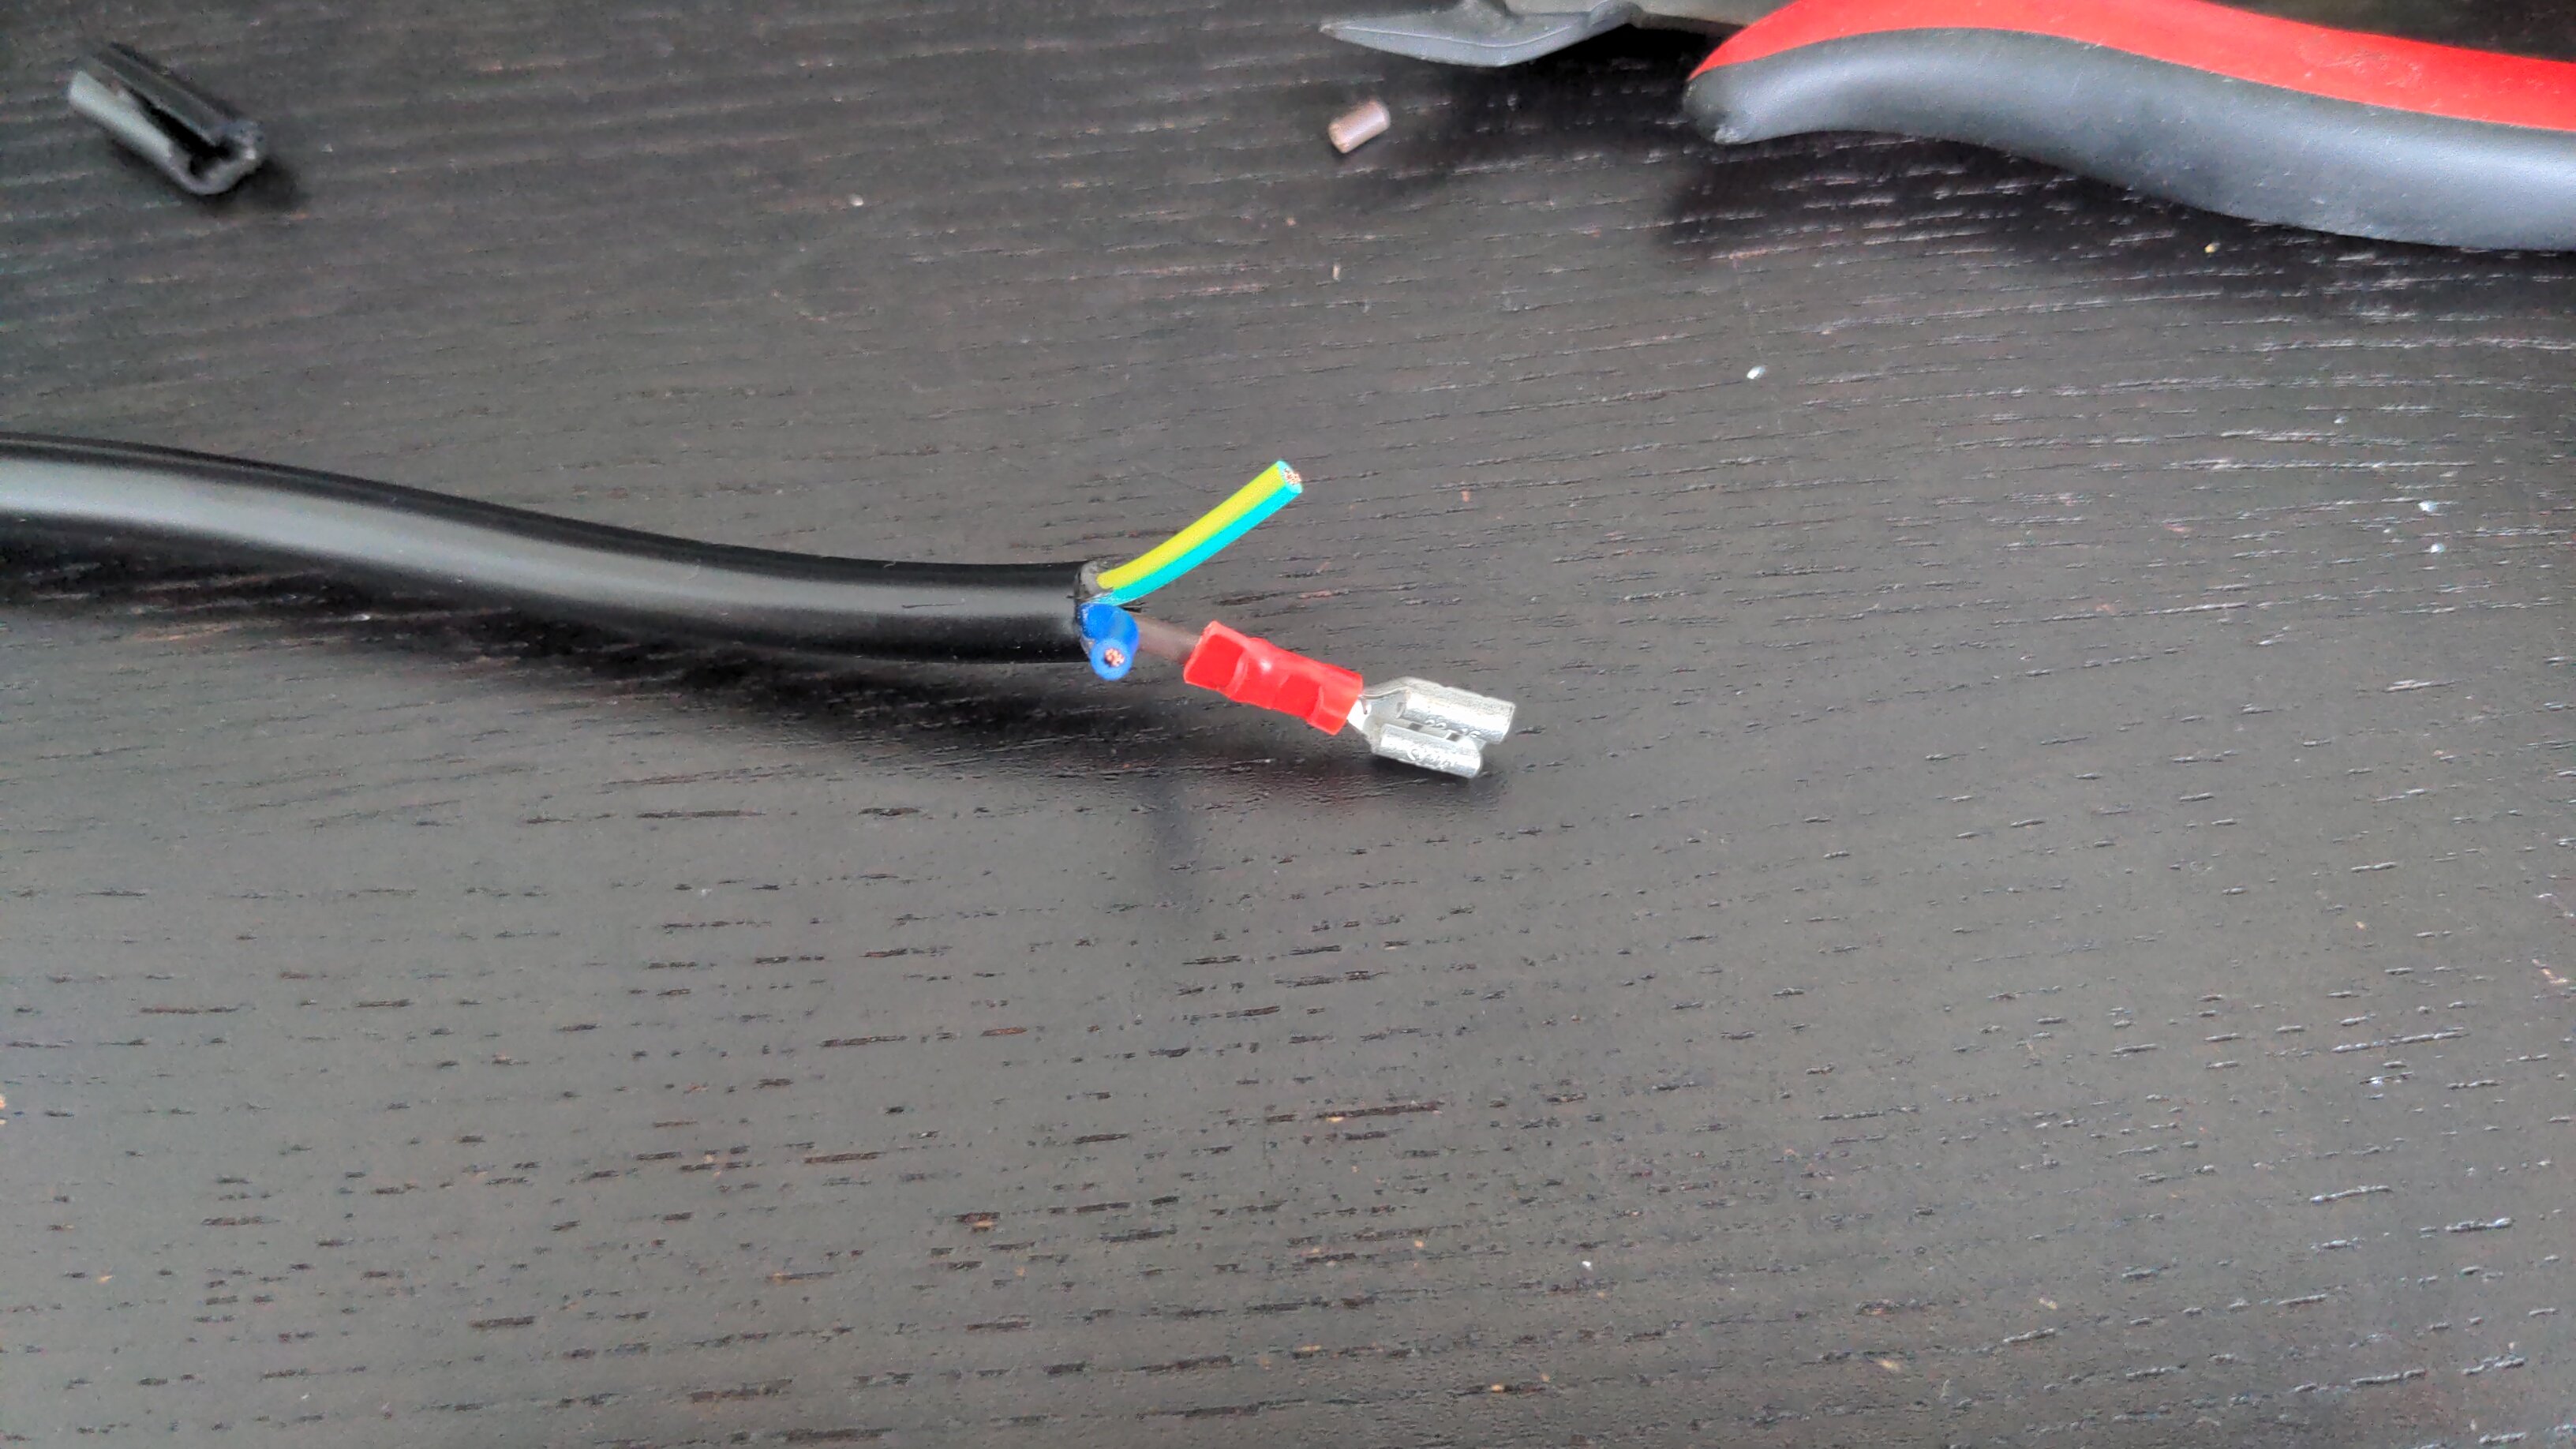 The cable, with one plug crimped onto the live wire